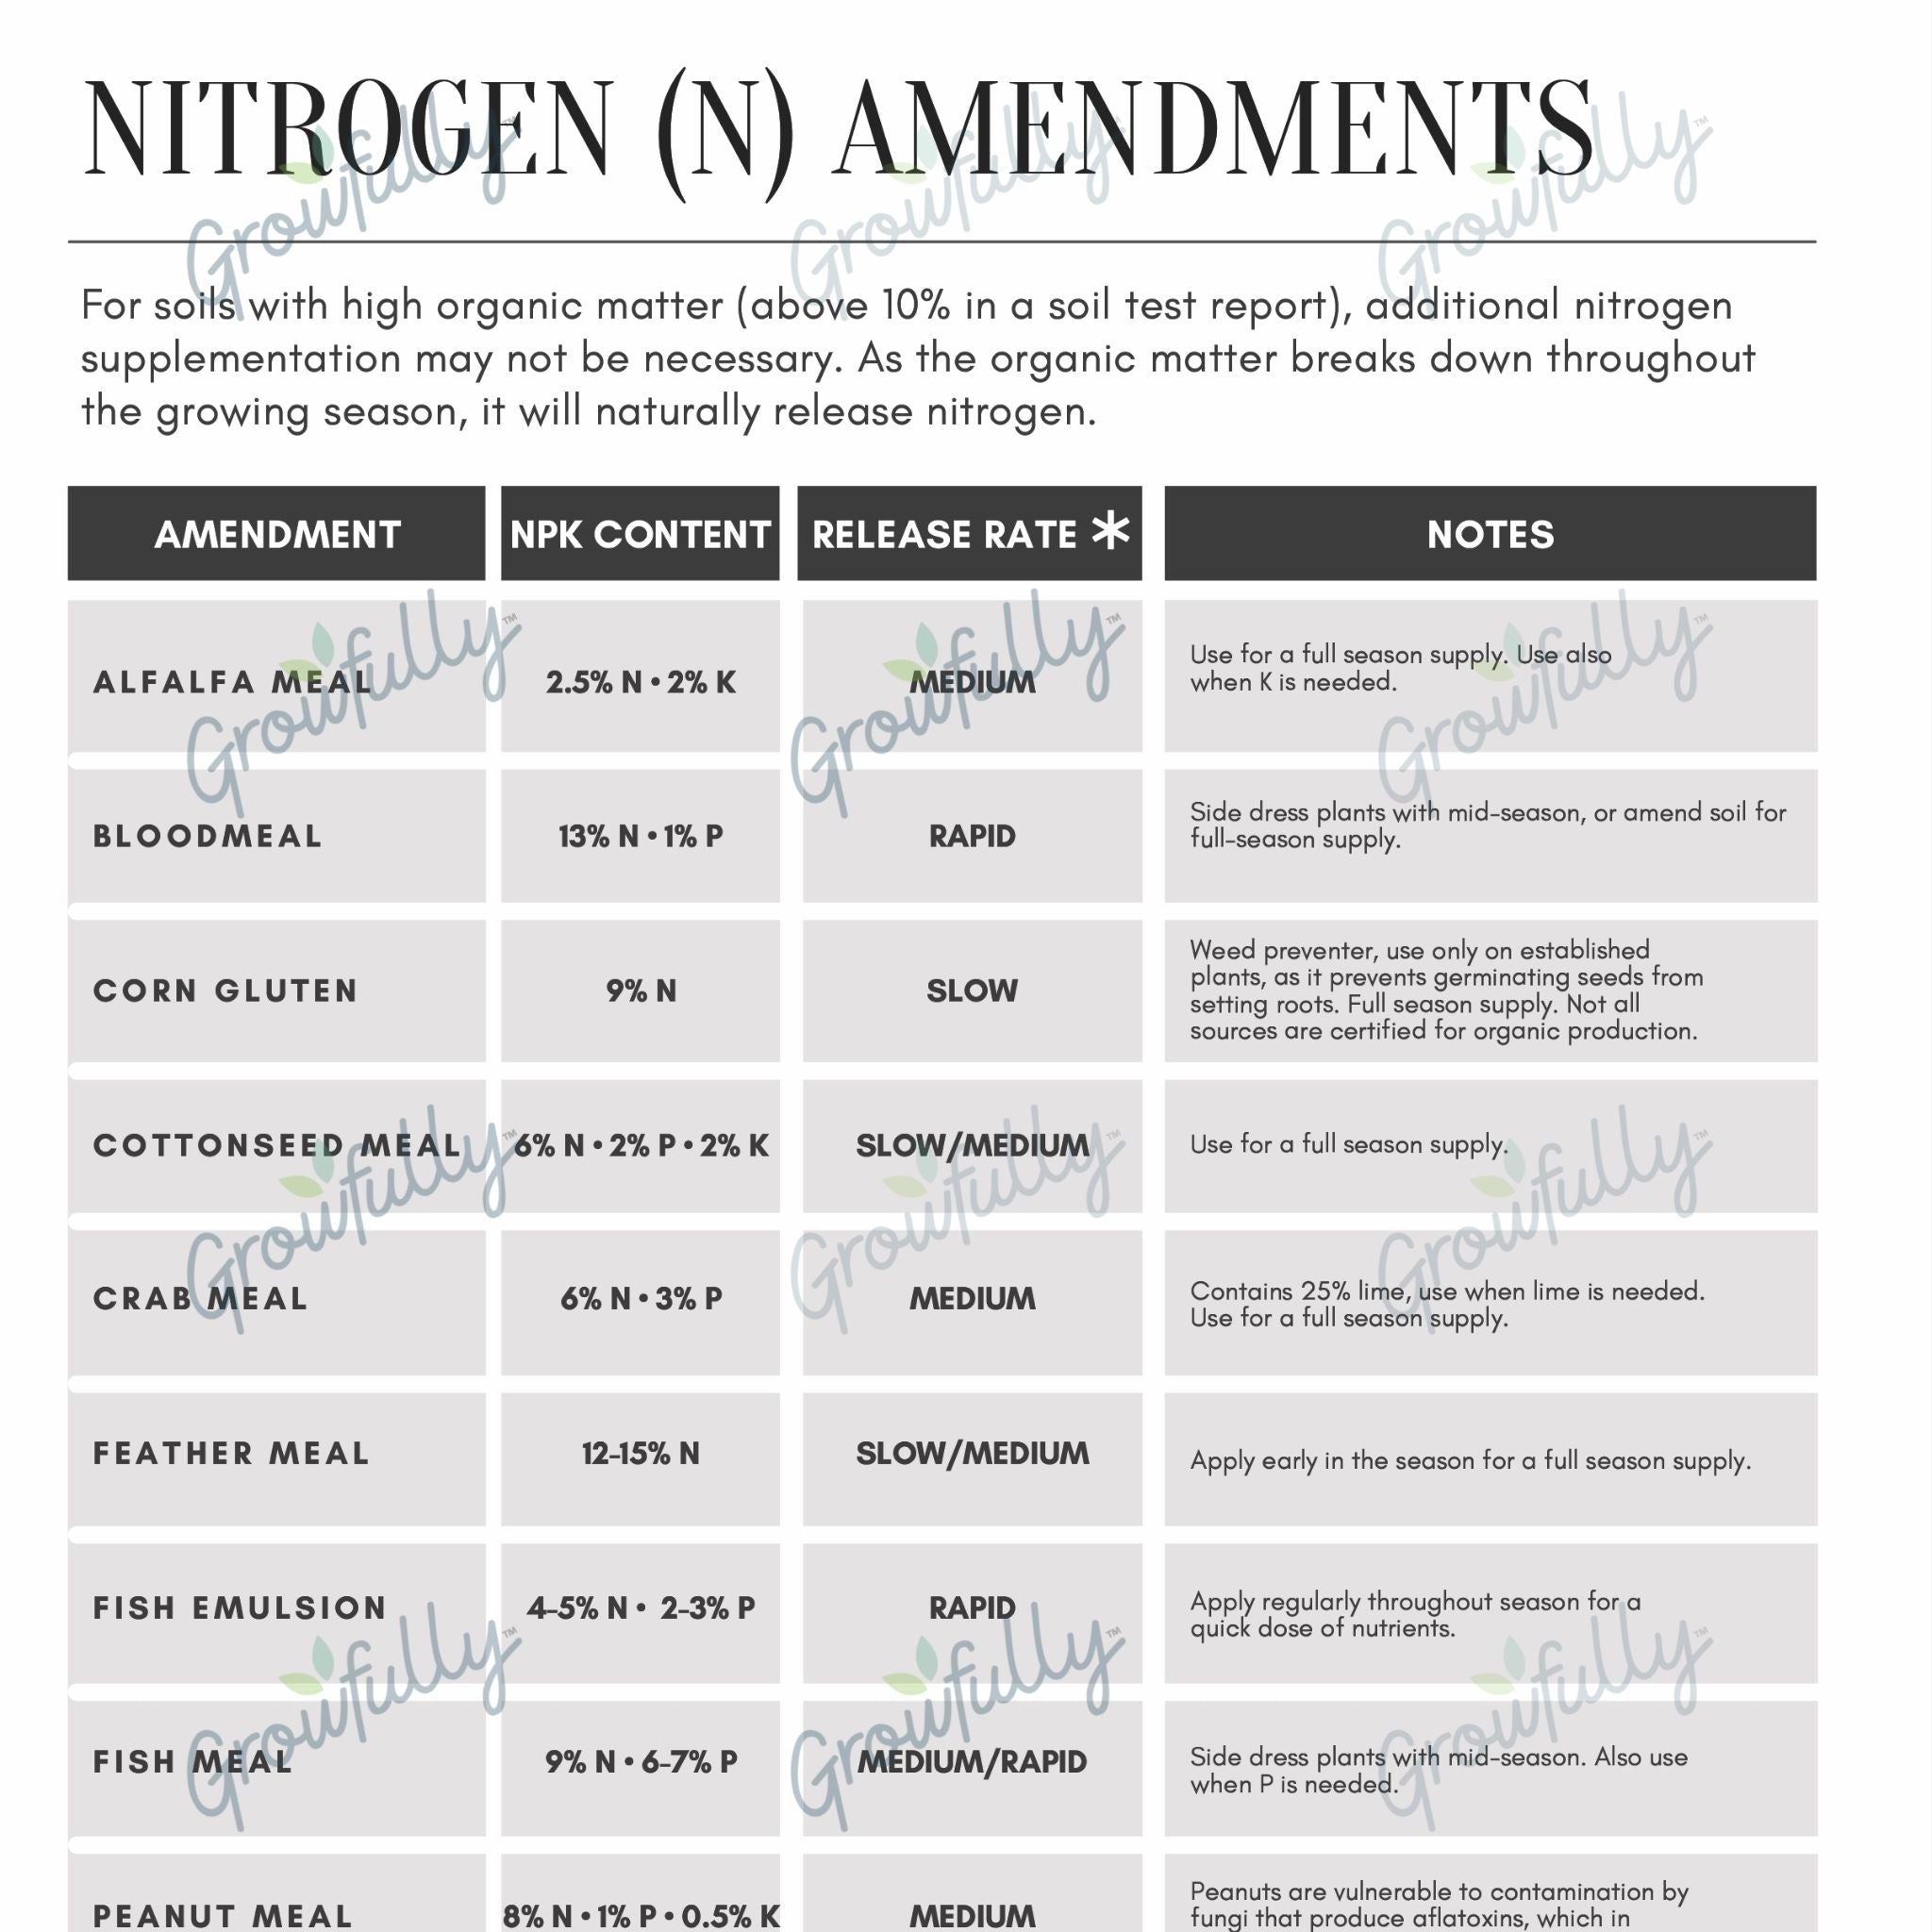 A sample of the nitrogen amendments options table, including alfalfa meal, bloodmeal, corn gluten, and more.